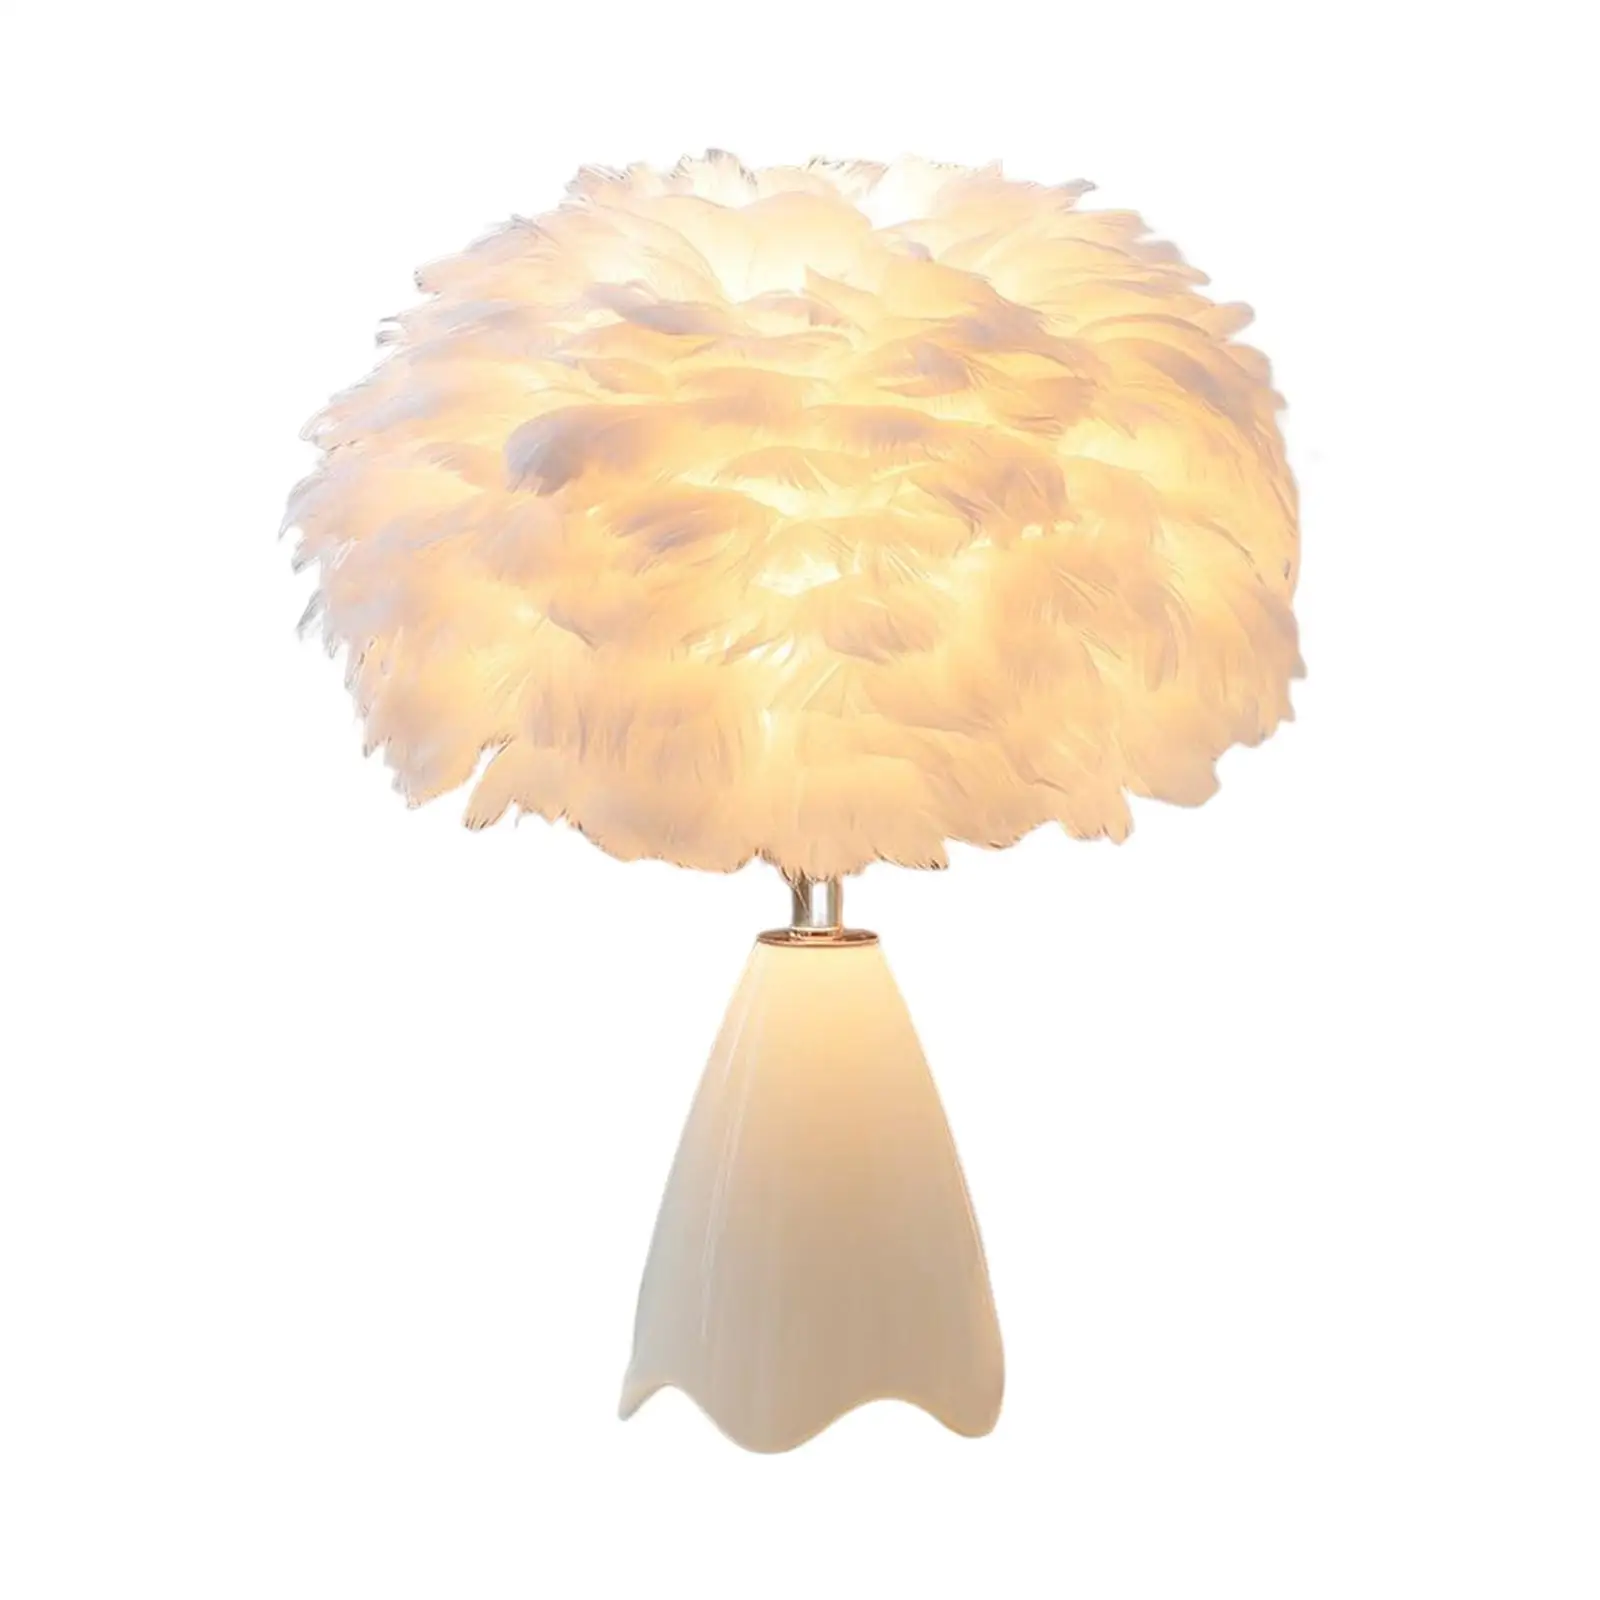 Feather Shade Table Lamp Romantic Warm White NightStand Lamp LED Desk Lamp Nordic for Desk Wedding Bedroom Home Decoration